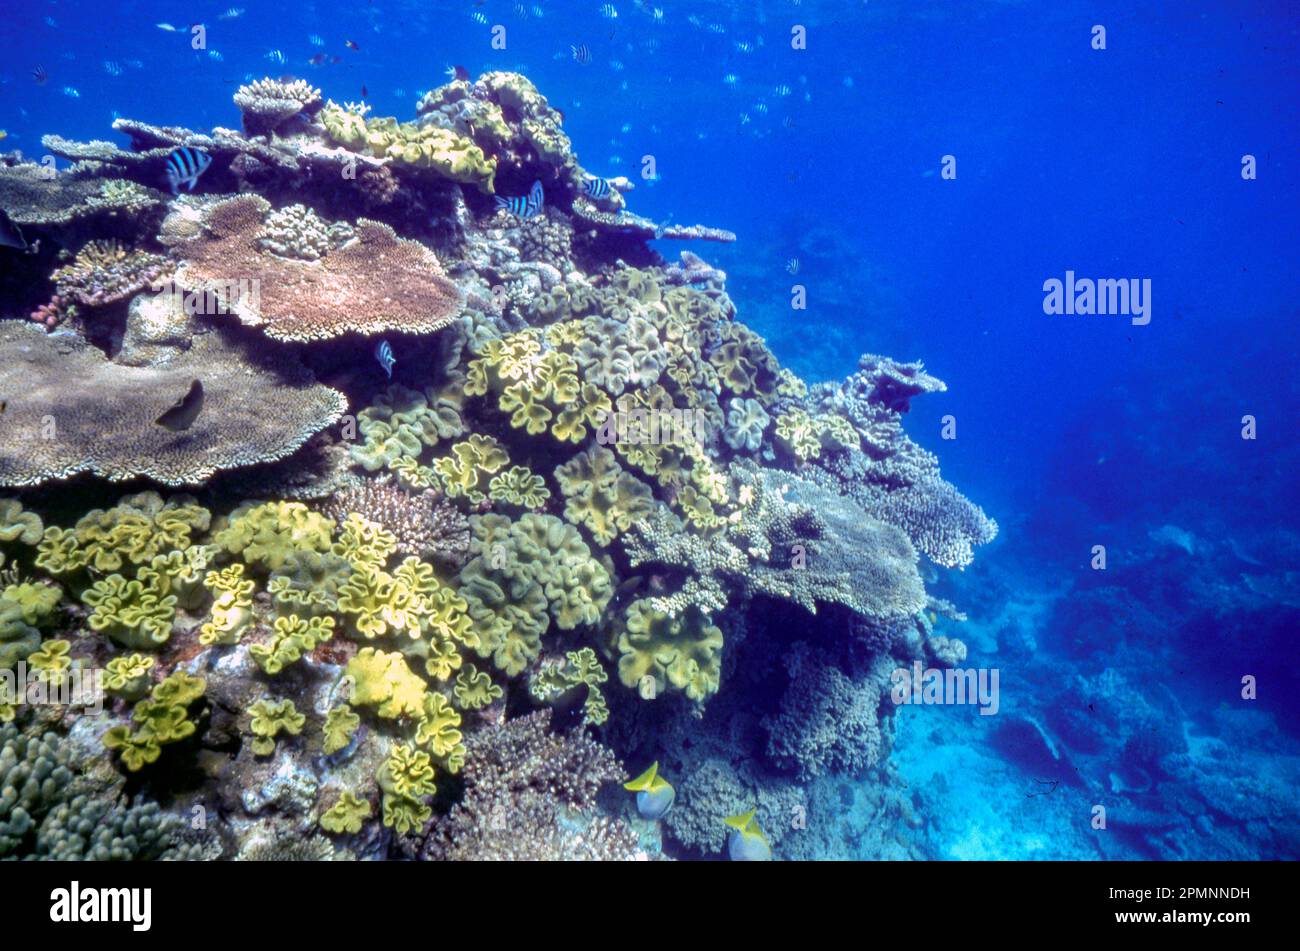 Table-shaped stony corals (Acropora sp.) and soft mushroom corals ...